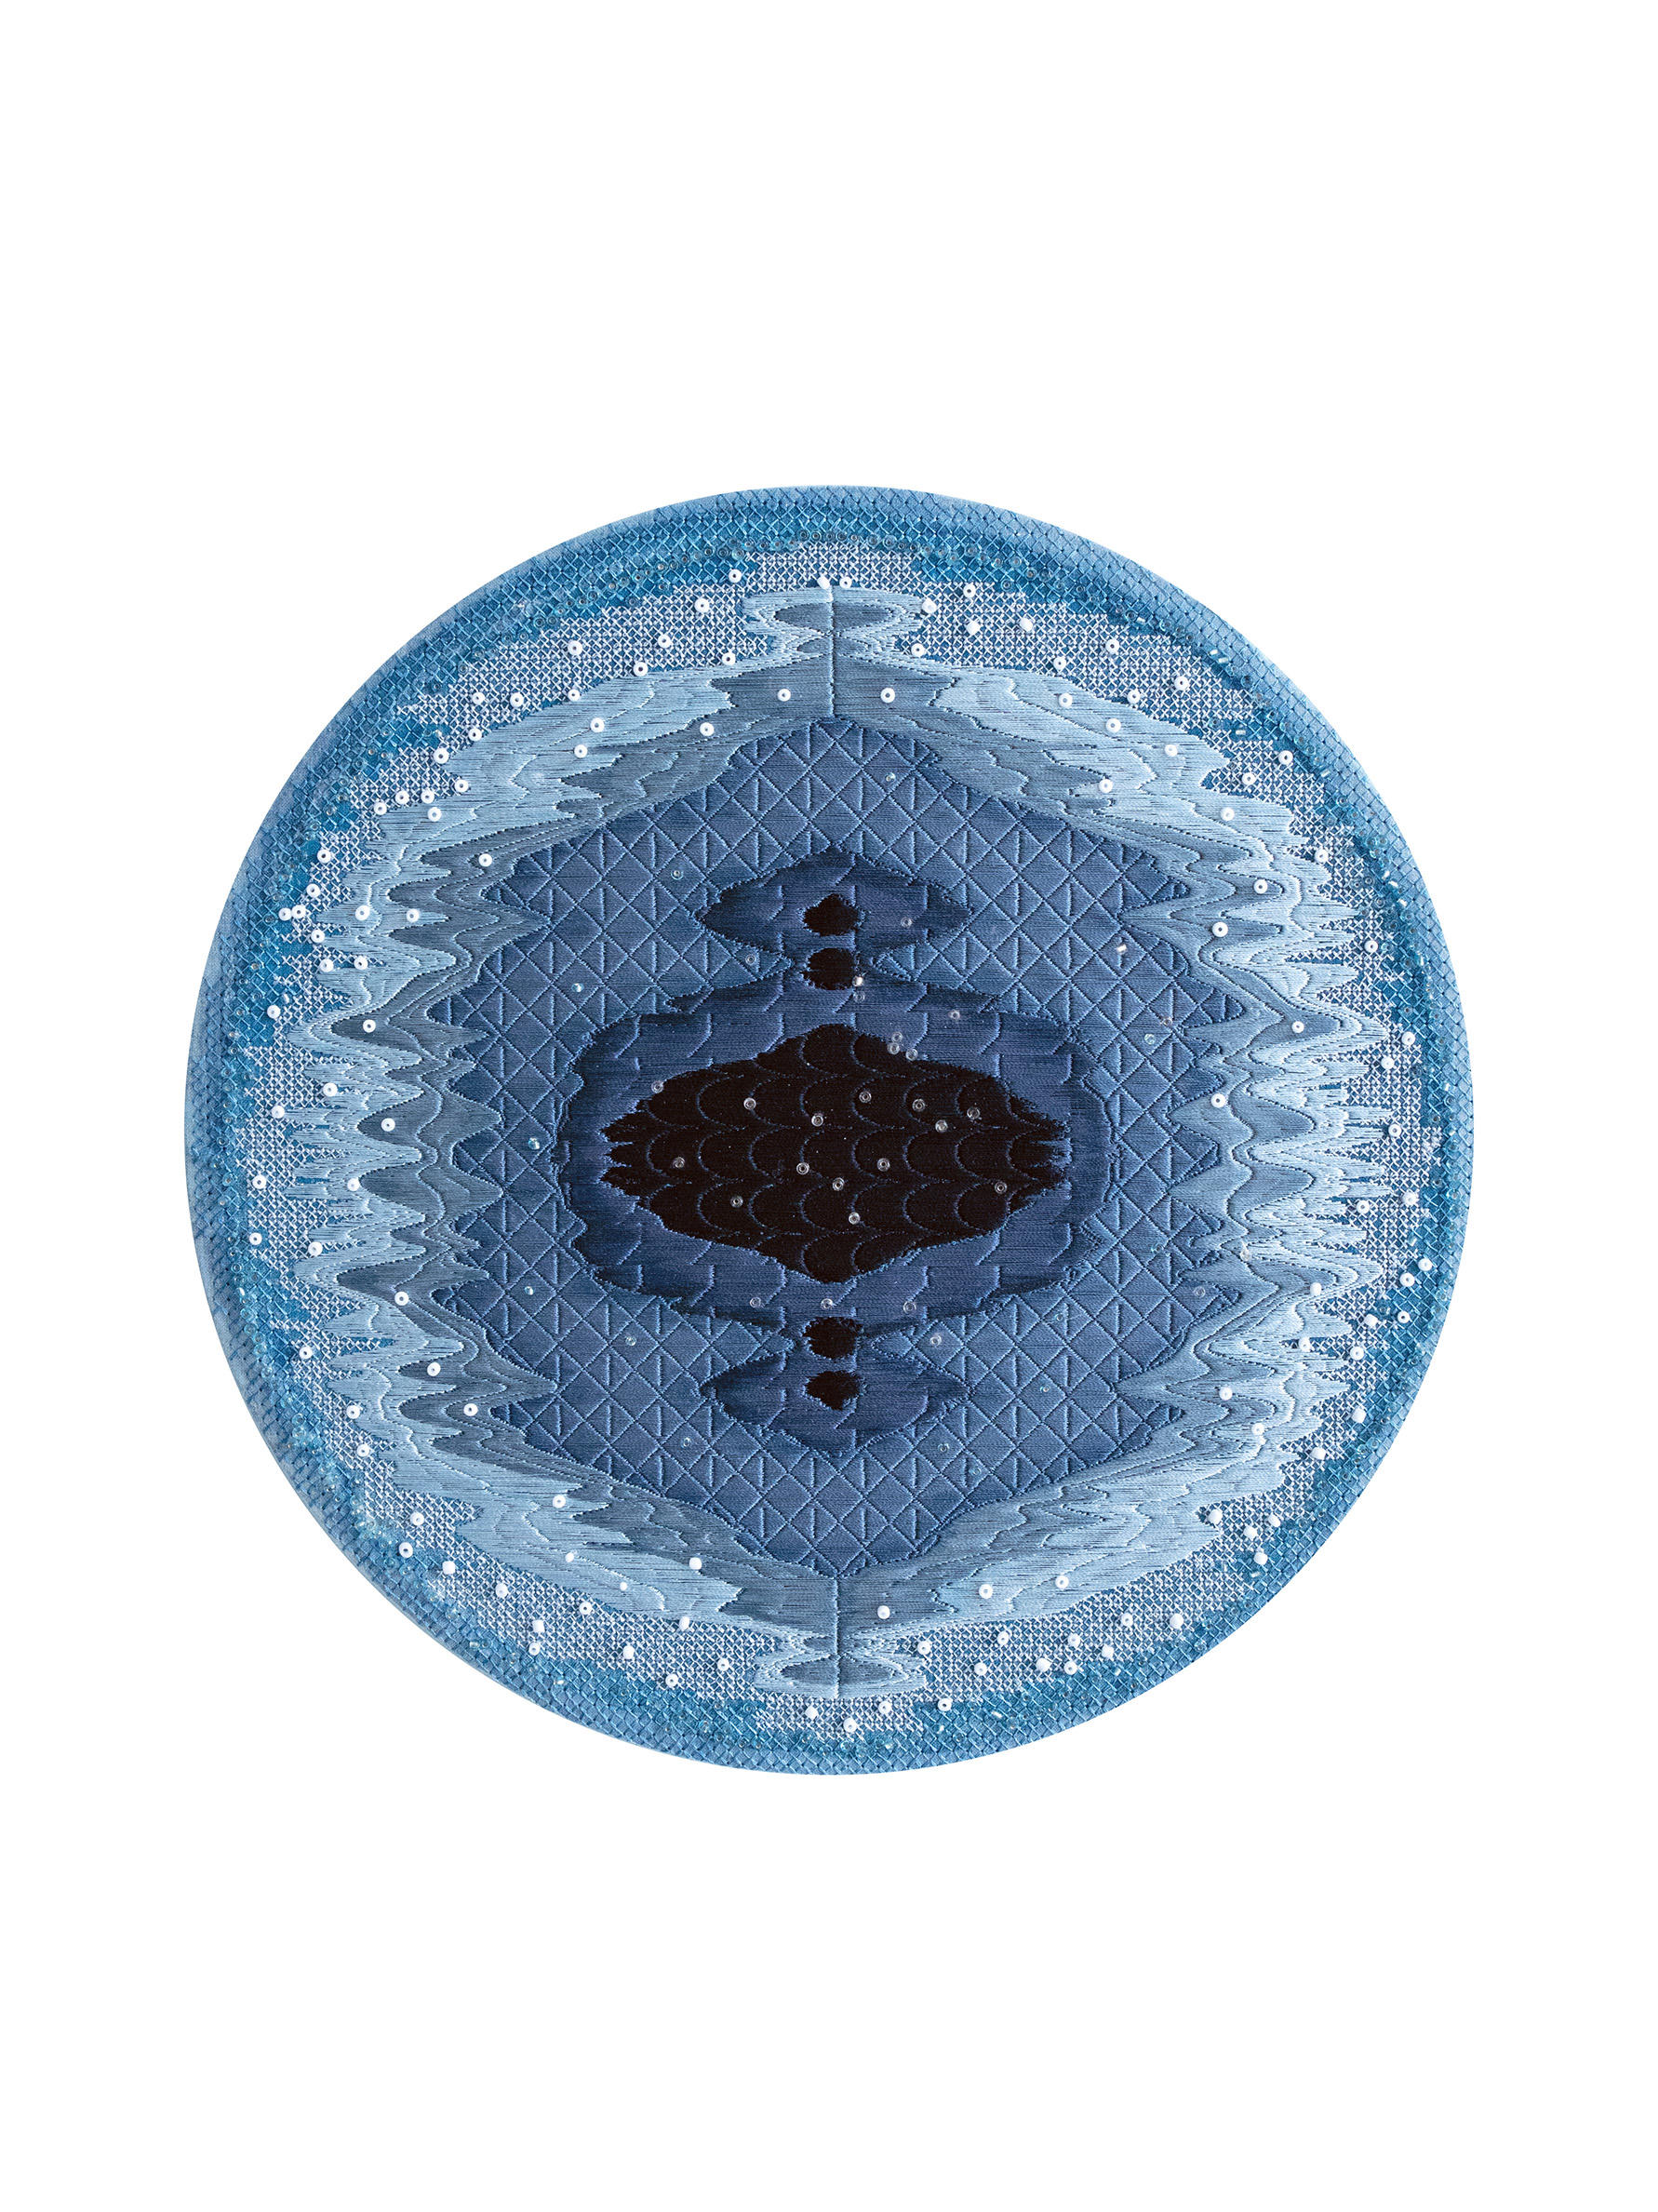 On a round cotton cloth dyed blue, I used embroidery and beadwork to make a blue pattern that looks a little like a reflection in a cup and a little like a cross-sectional shape of the earth.